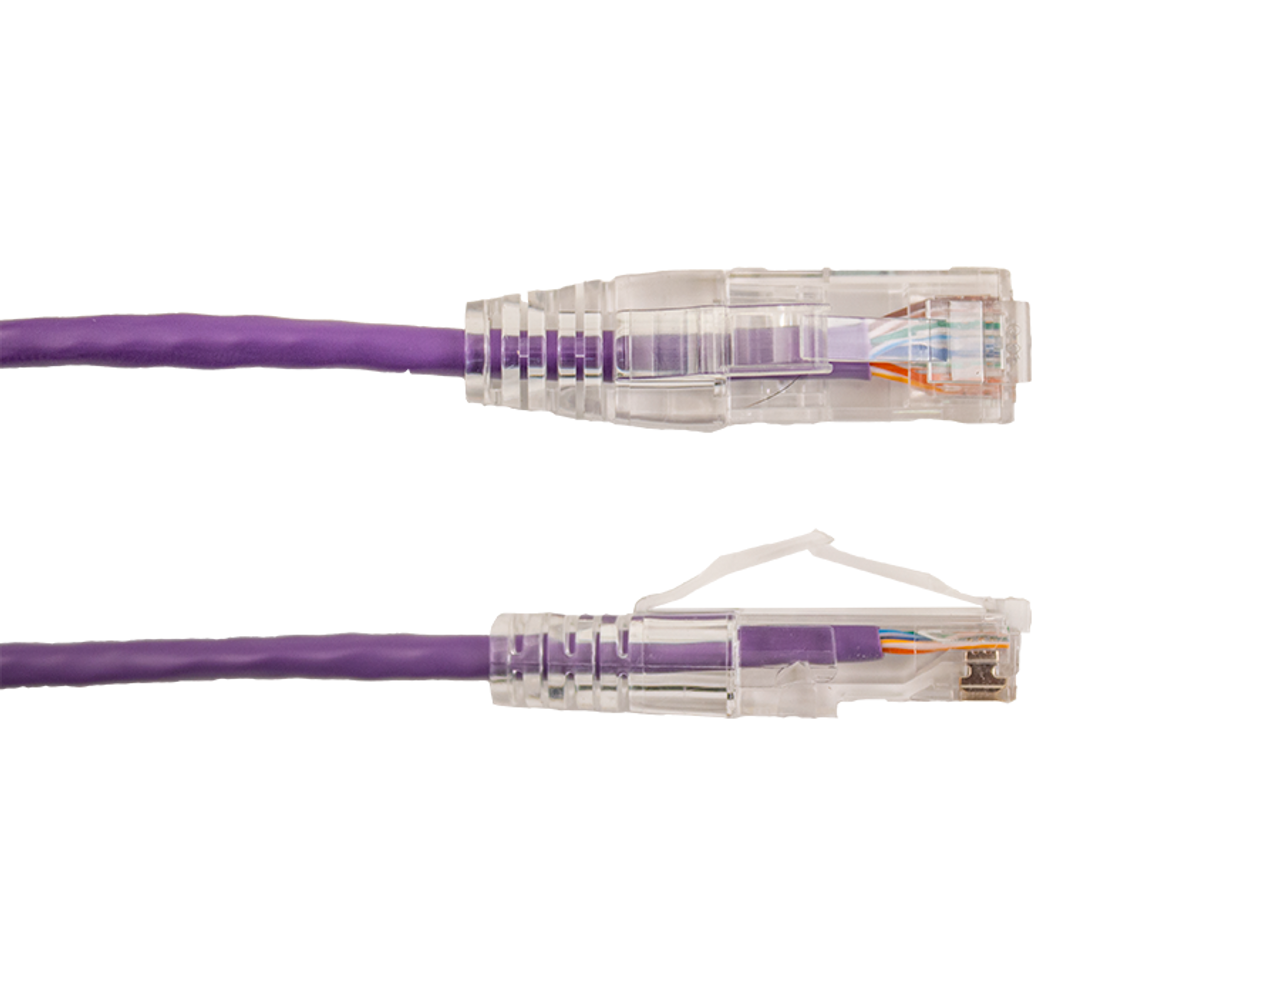 Category-6A Slim Type Mold-Injection-Snagless Patch Cord, 14FT, 28AWG Stranded, PVC Jacket, Purple.